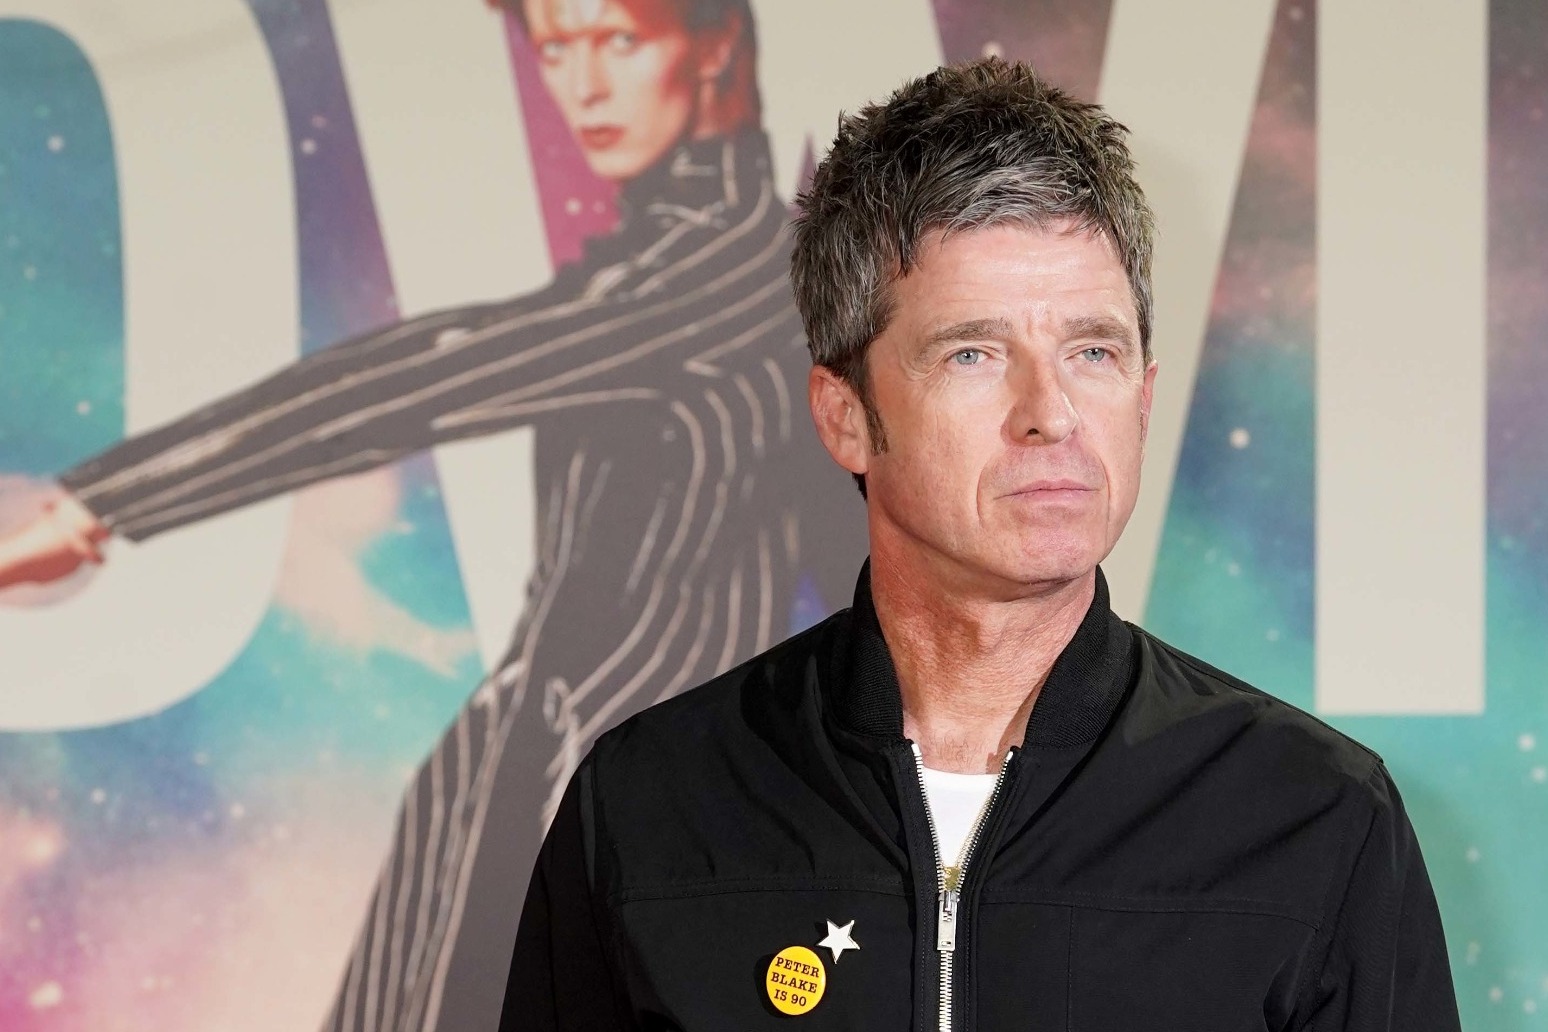 Noel Gallagher and Madness among line-up for Peter Blake’s 90th birthday concert 